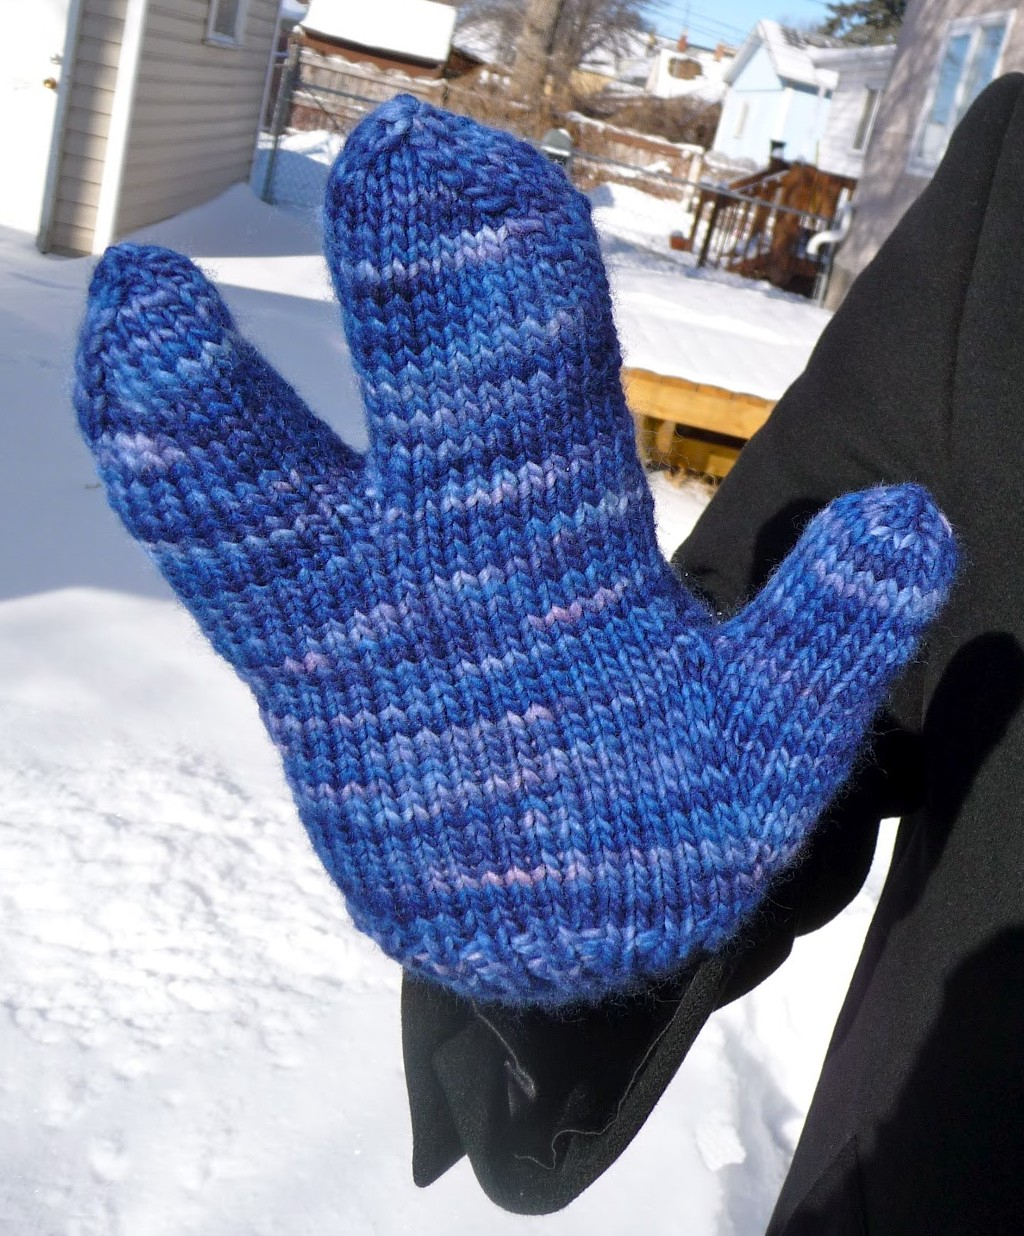 Free Knitted Glove Patterns Fun Mitten And Glove Knitting Patterns In The Loop Knitting